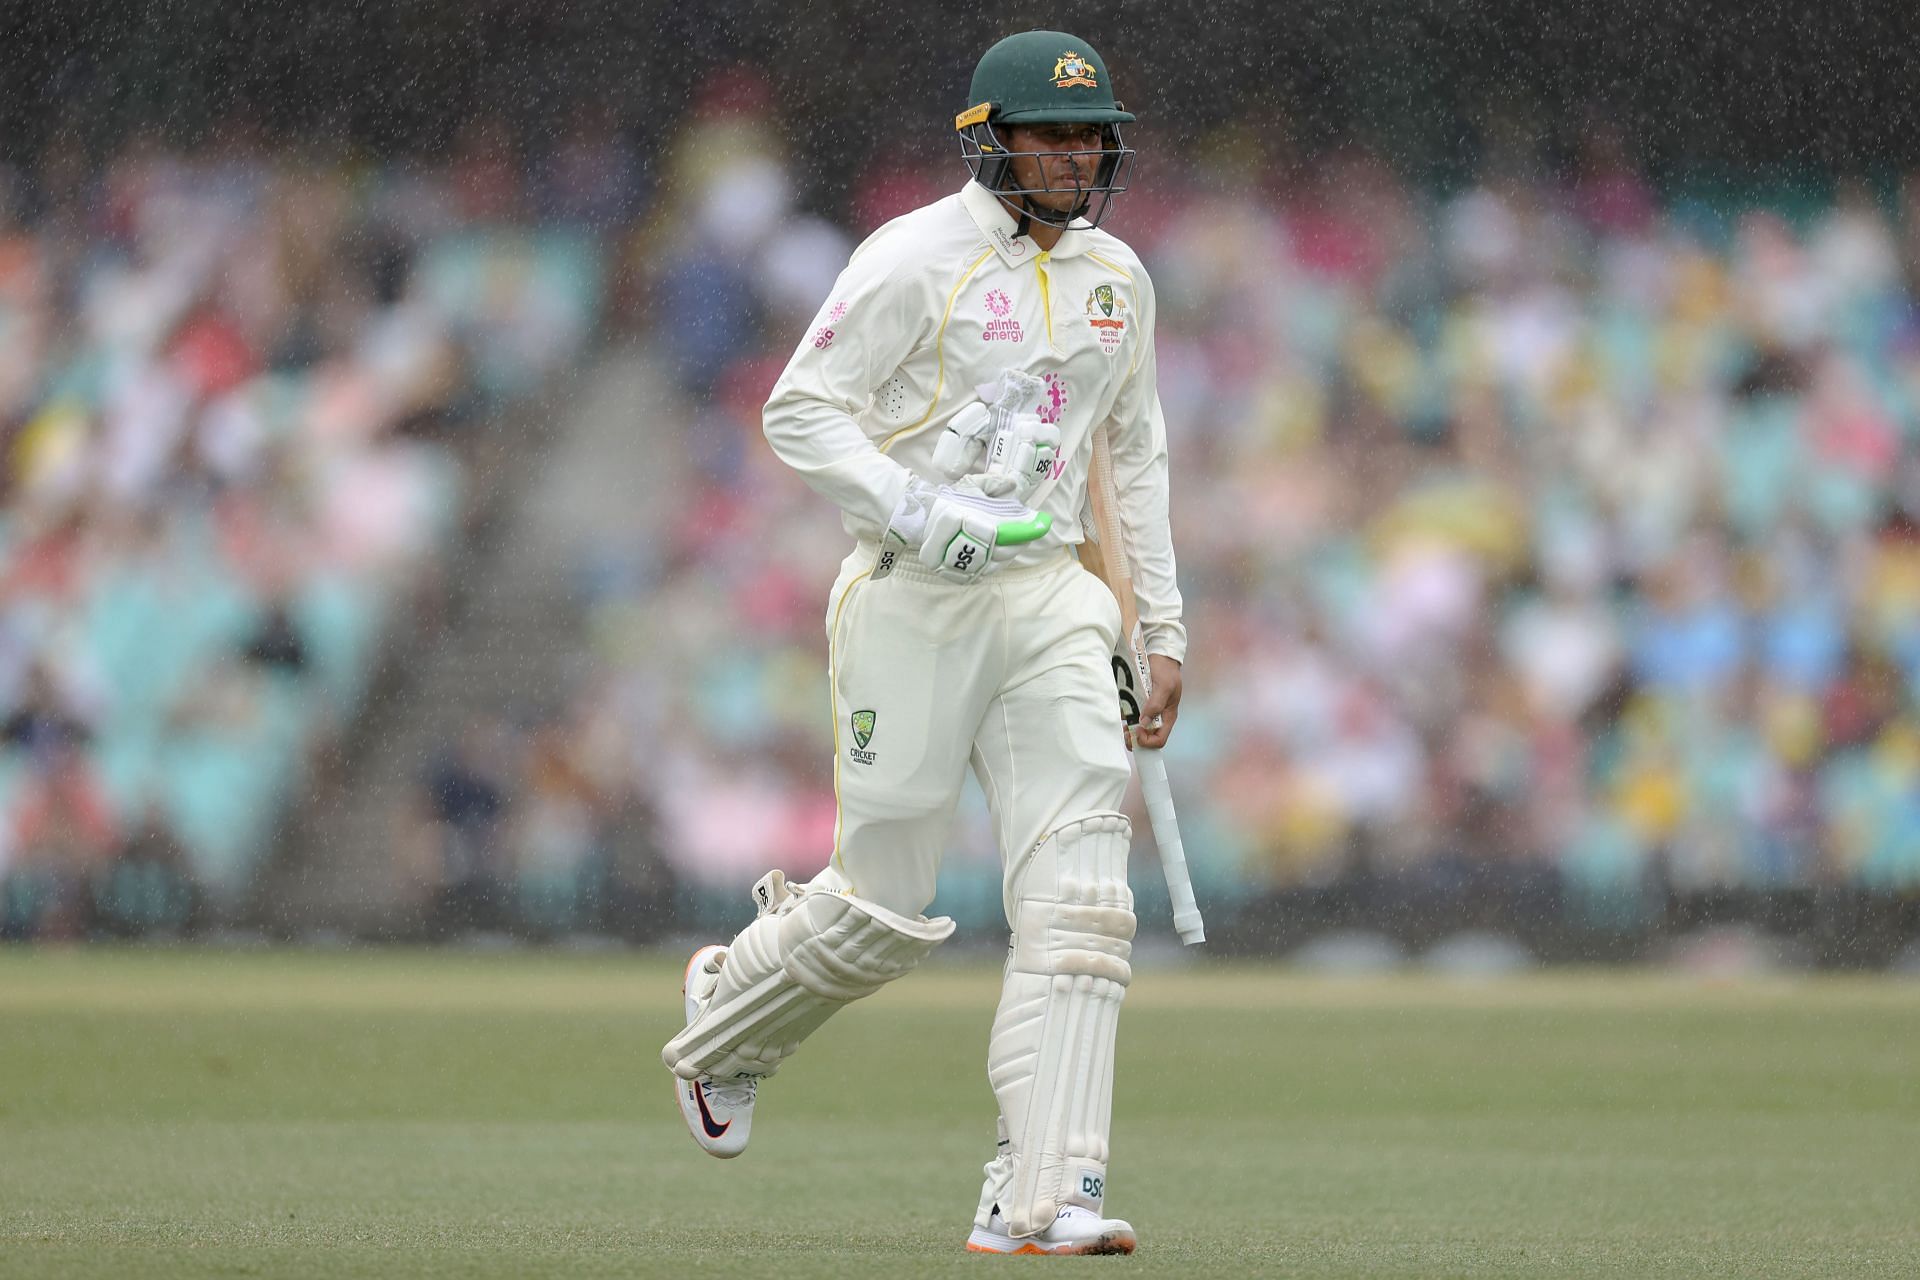 Michael Atherton praised Usman Khawaja (in pic), who scored his ninth Test century on Day 2 of the fourth Ashes Test